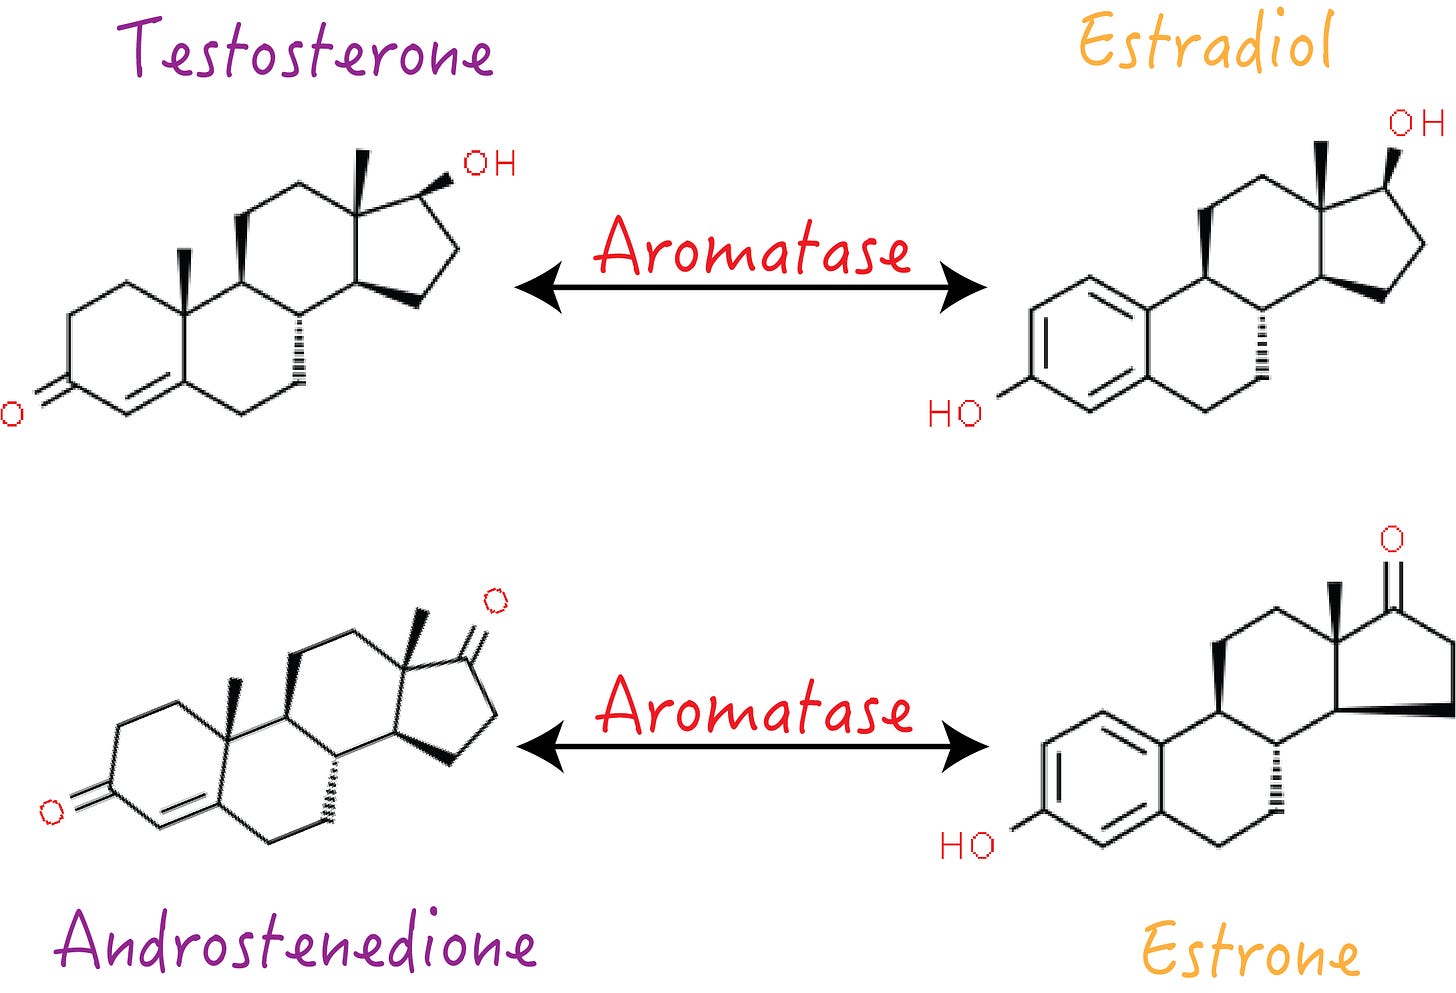 Cartoon showing the chemical effects of aromatase